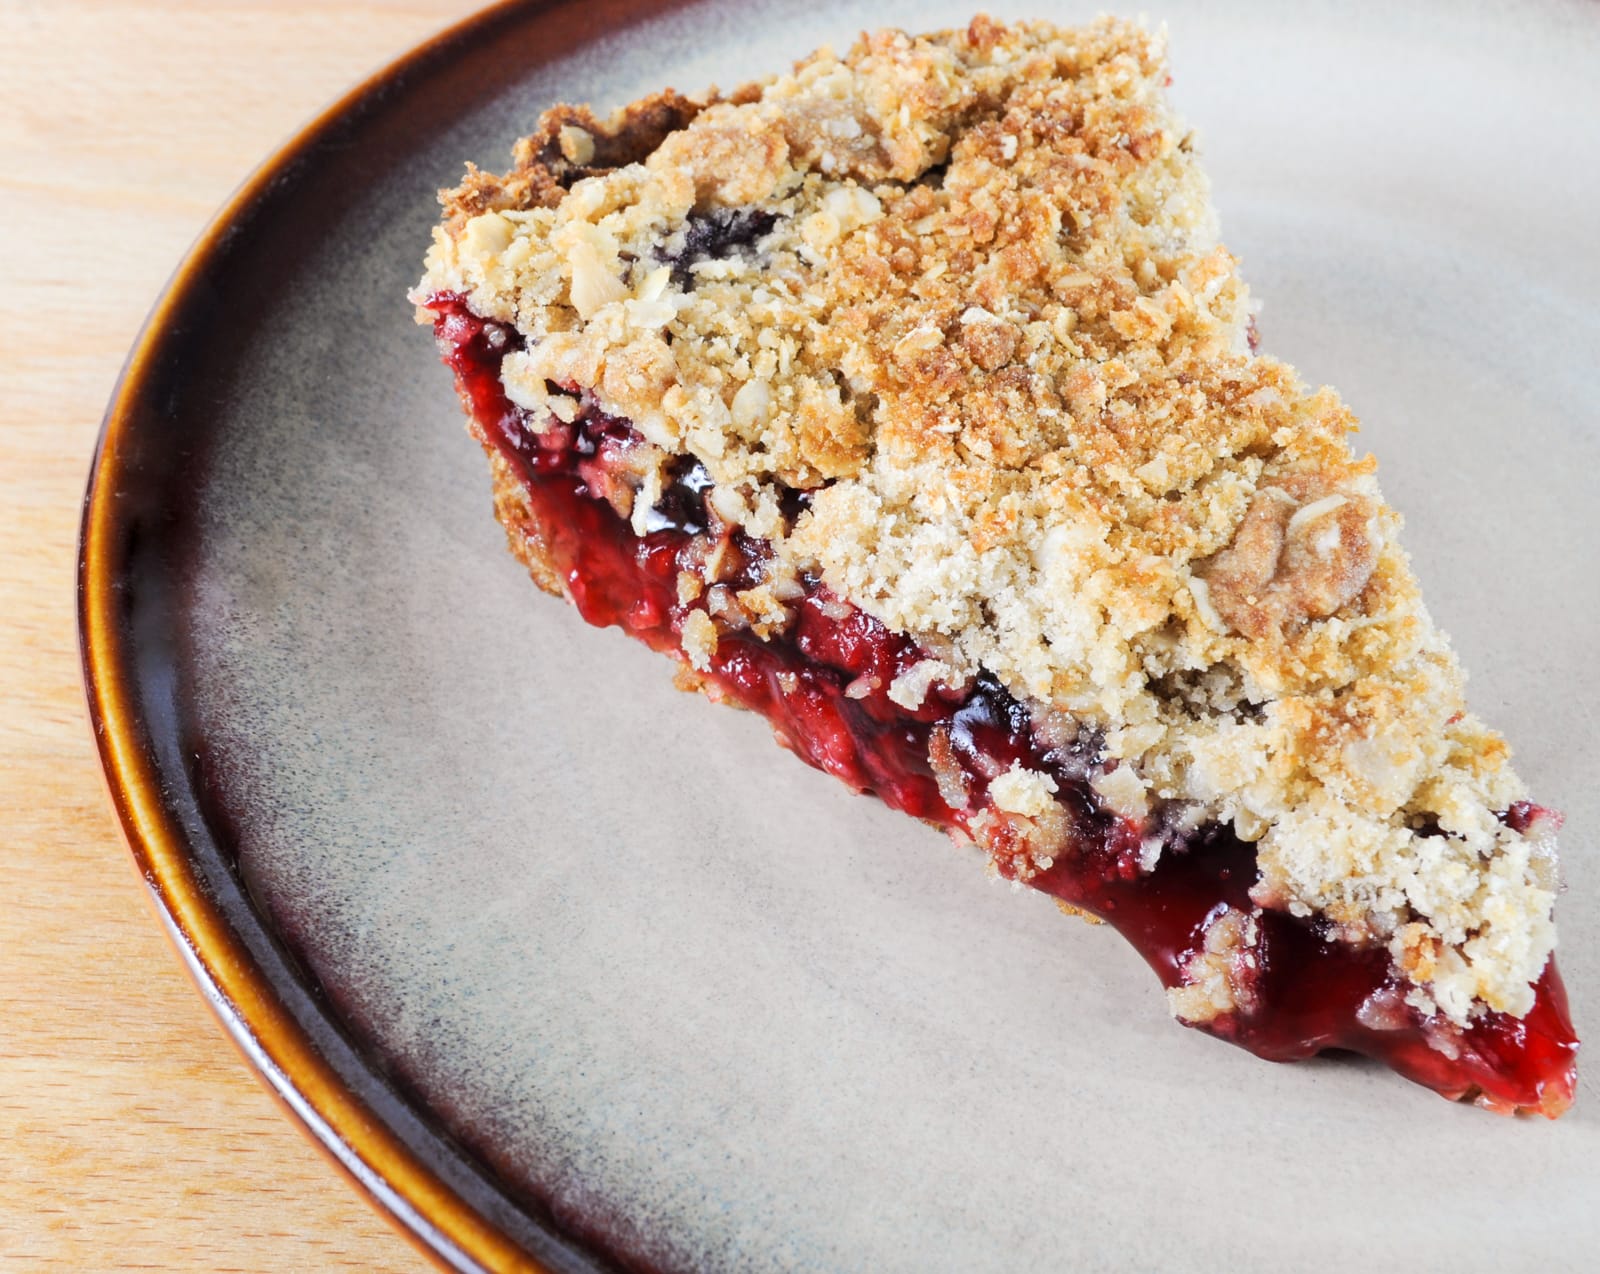 Raspberry Pie Recipe (with Streusel Topping)